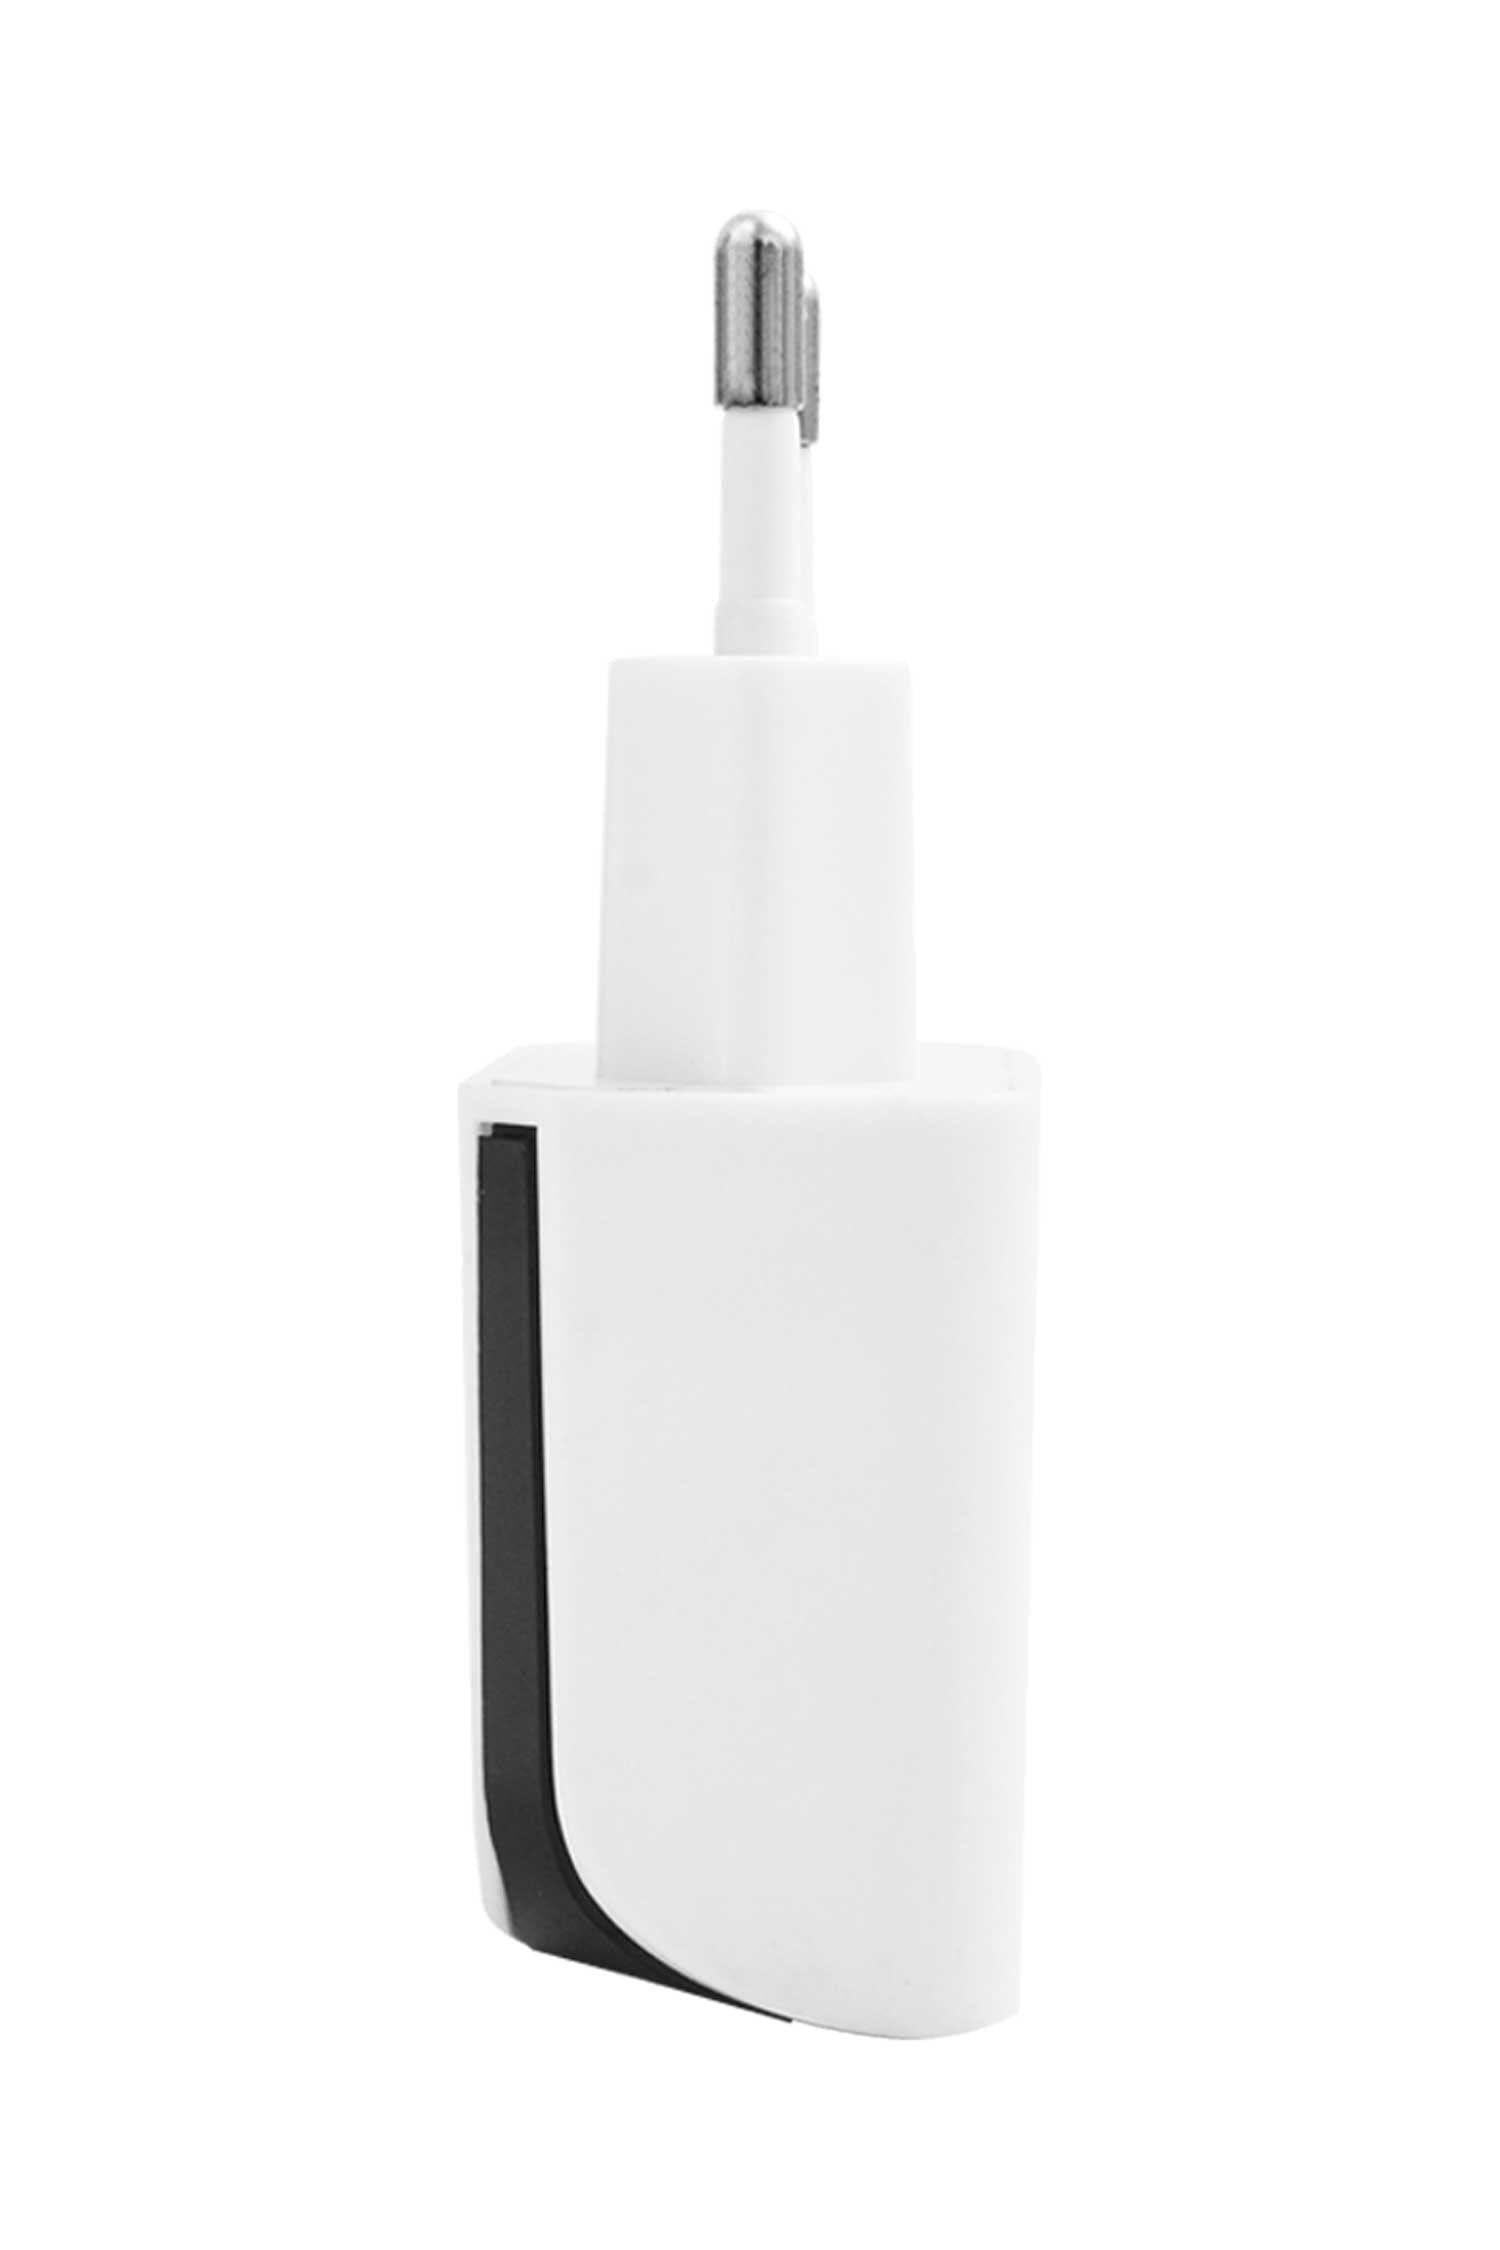 Nordic Dual Port Charging Power Supply Adapter